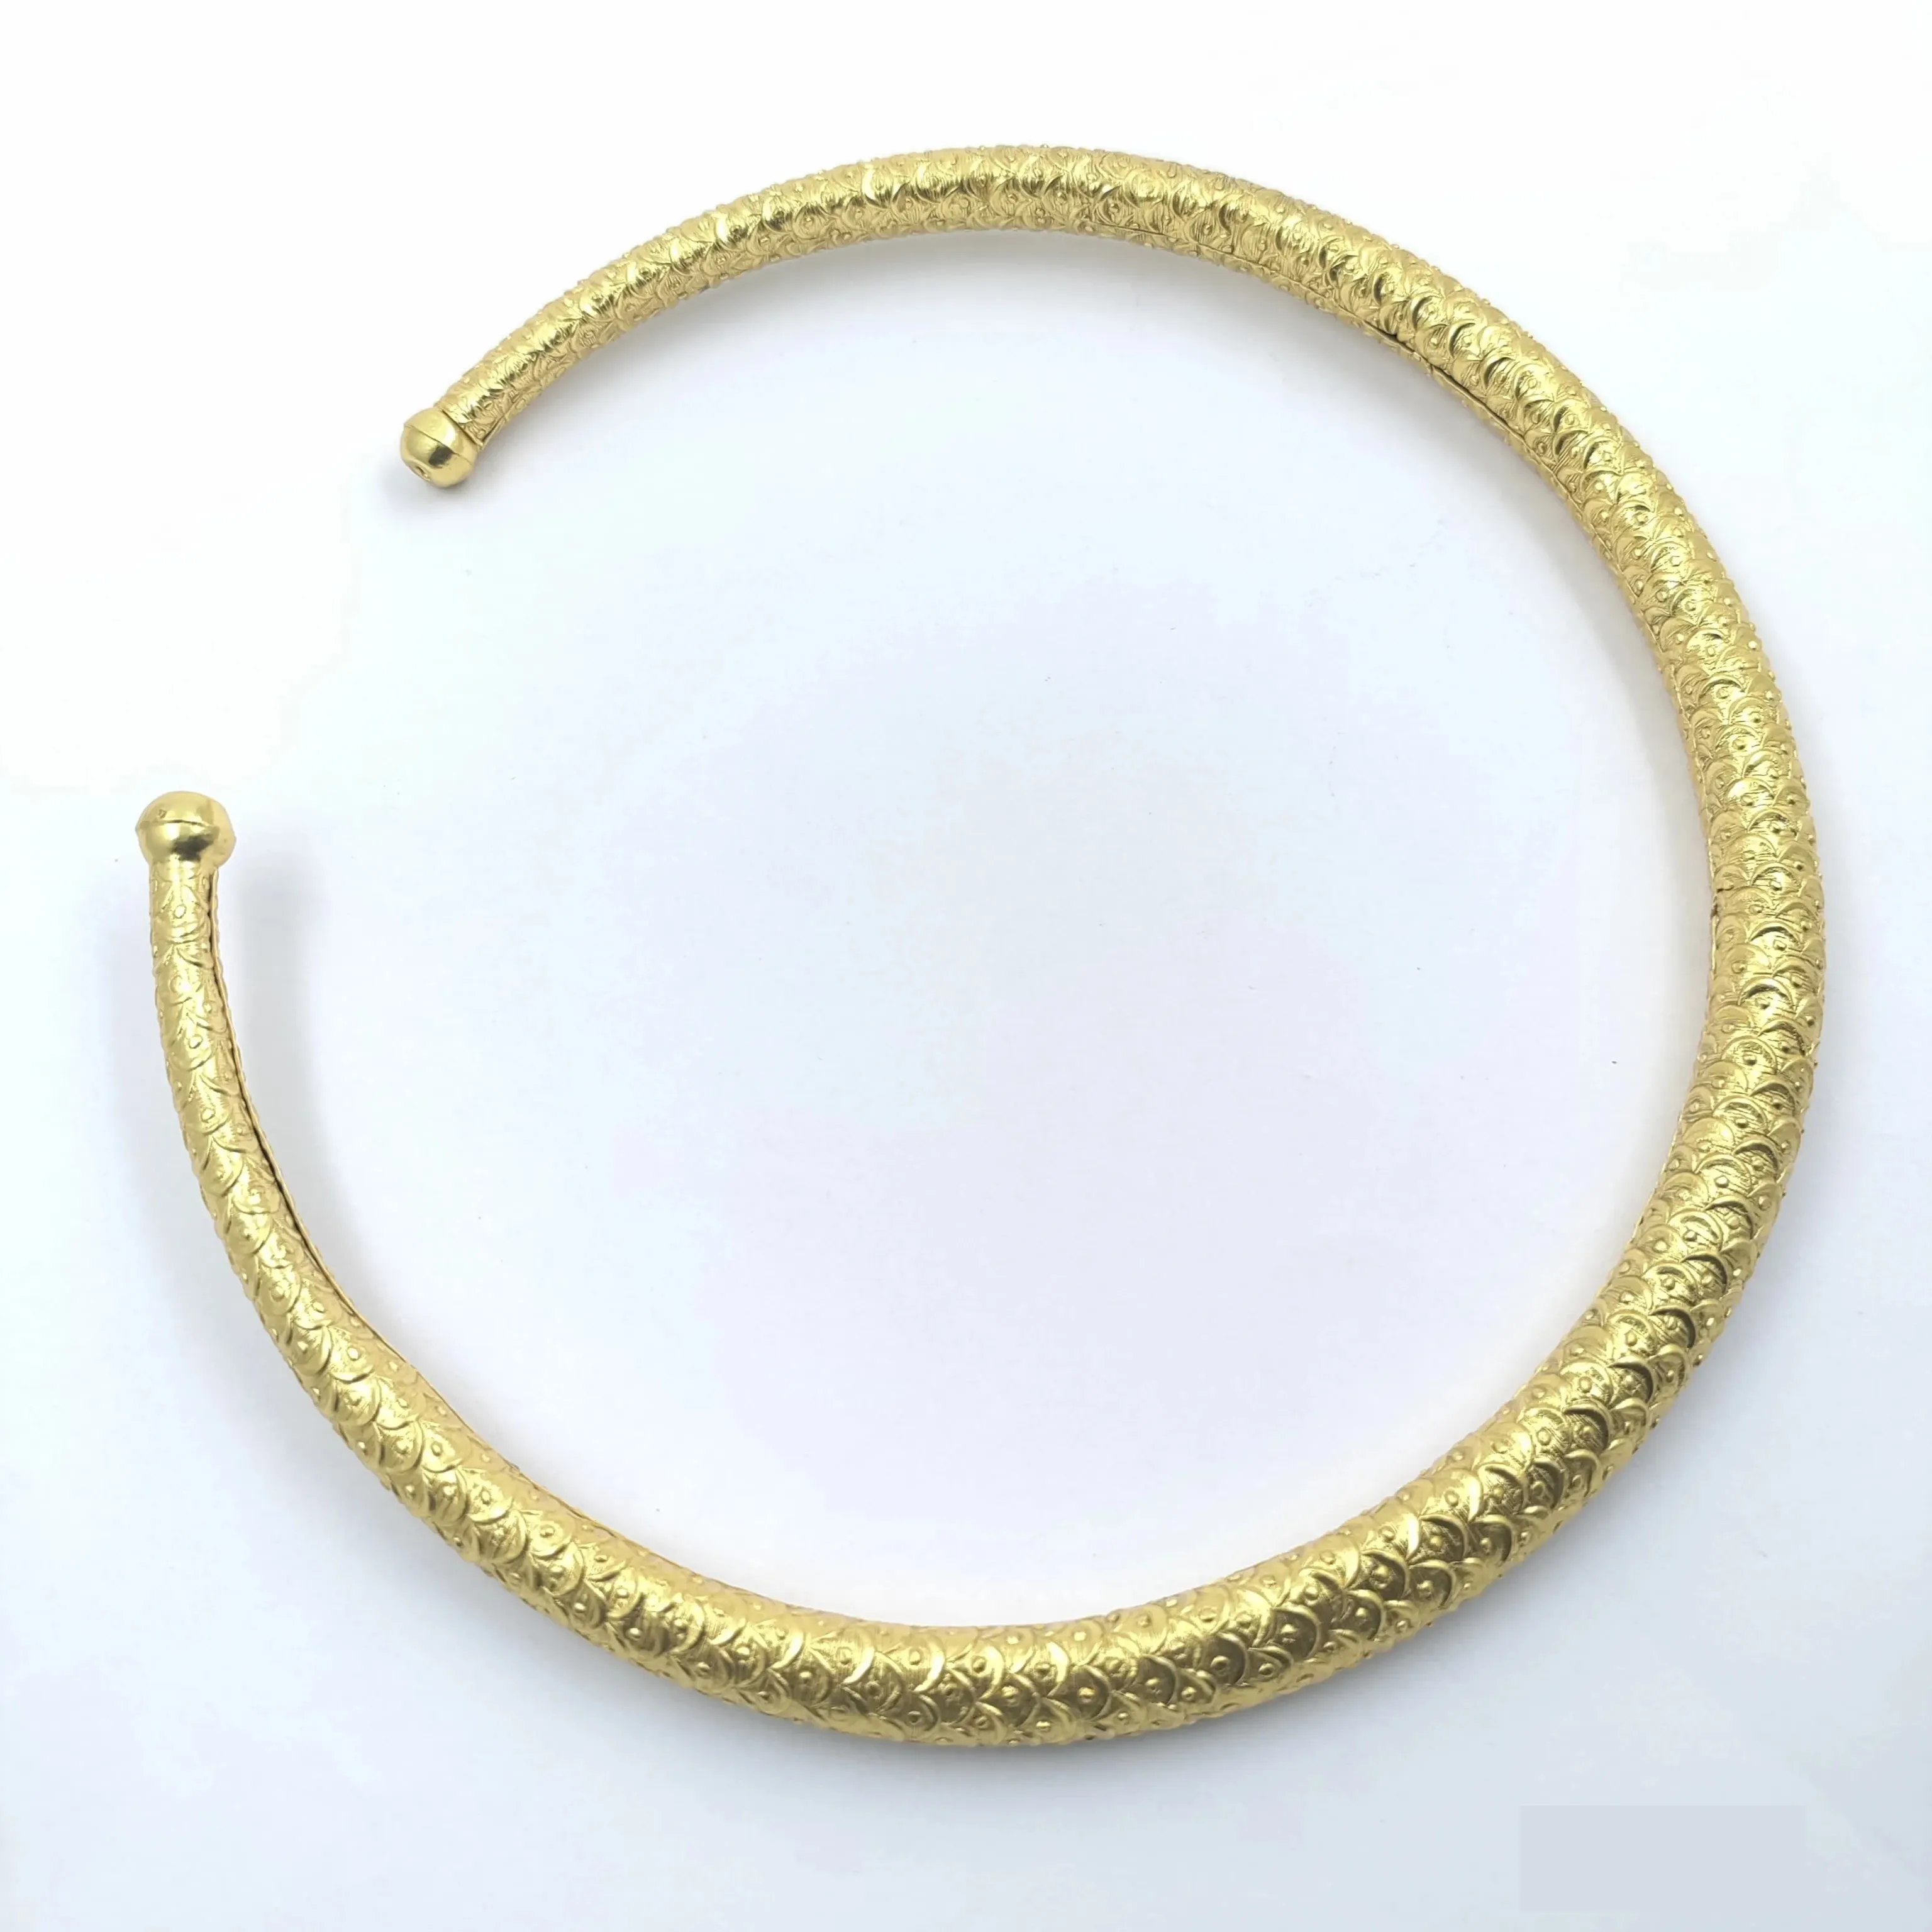 Direct factory Supply Of Fashion Jewelry Latest Design Brass Hasli Choker Necklace Buy At Reasonable Price